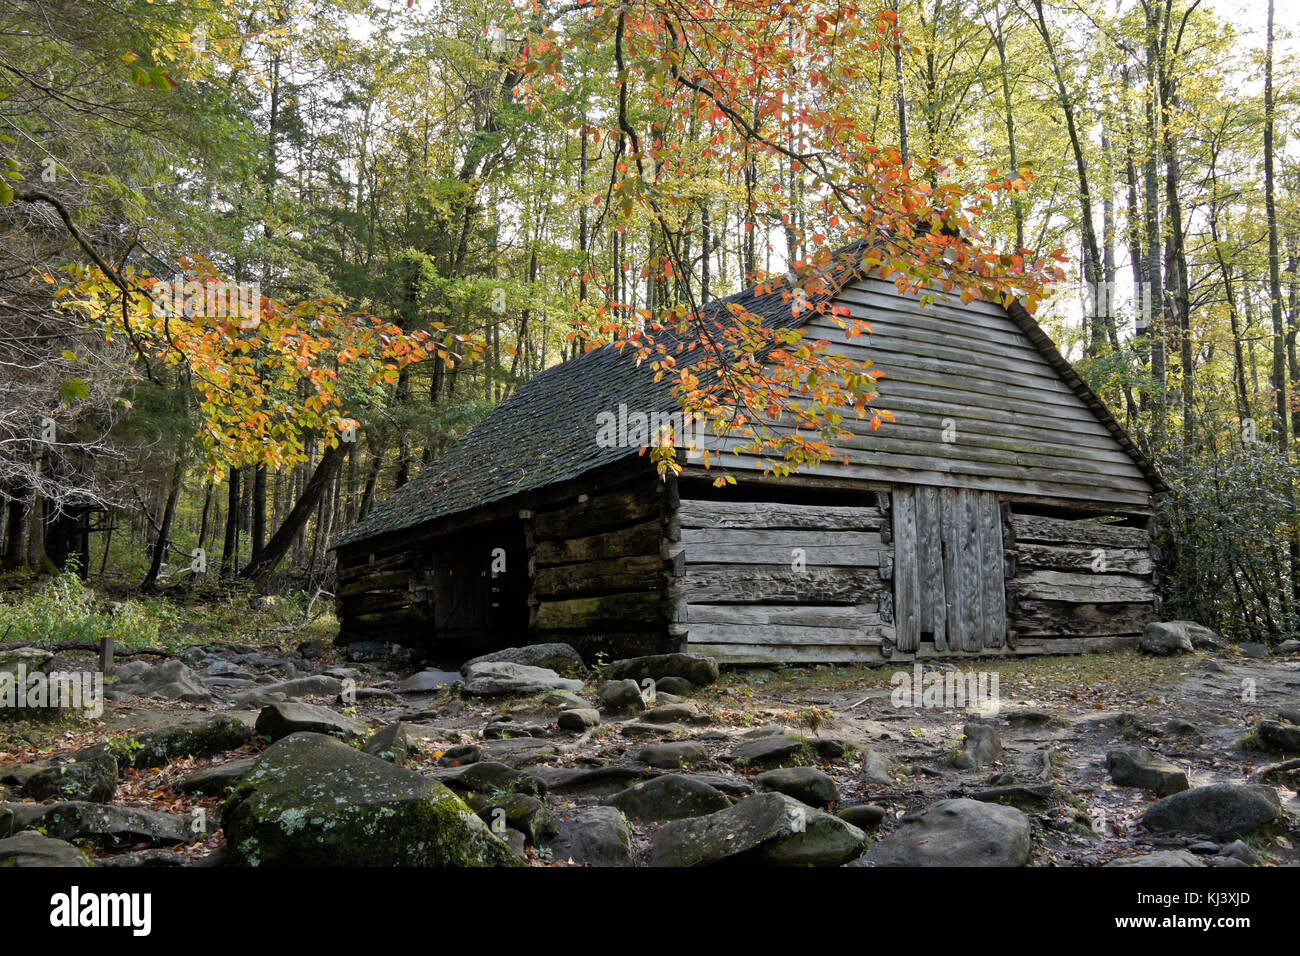 Autumn foliage and old wood barn at the Noah 'Bud' Ogle Place, Roaring Fork Motor Nature Trail, Great Smoky Mountains National Park, Tennessee Stock Photo